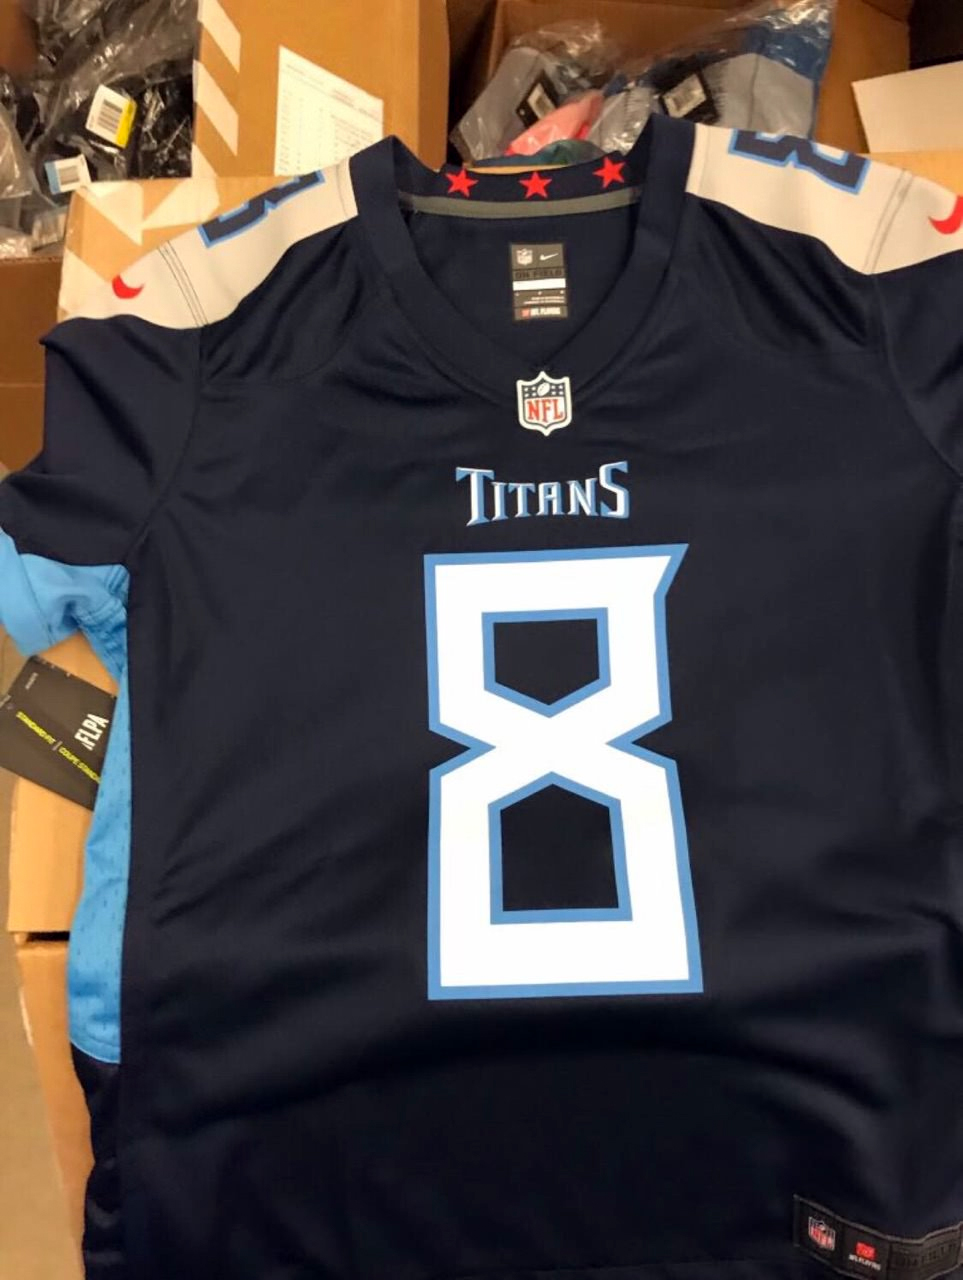 On Eve of Unveiling, New Tennessee Titans Jersey Possibly Leaked